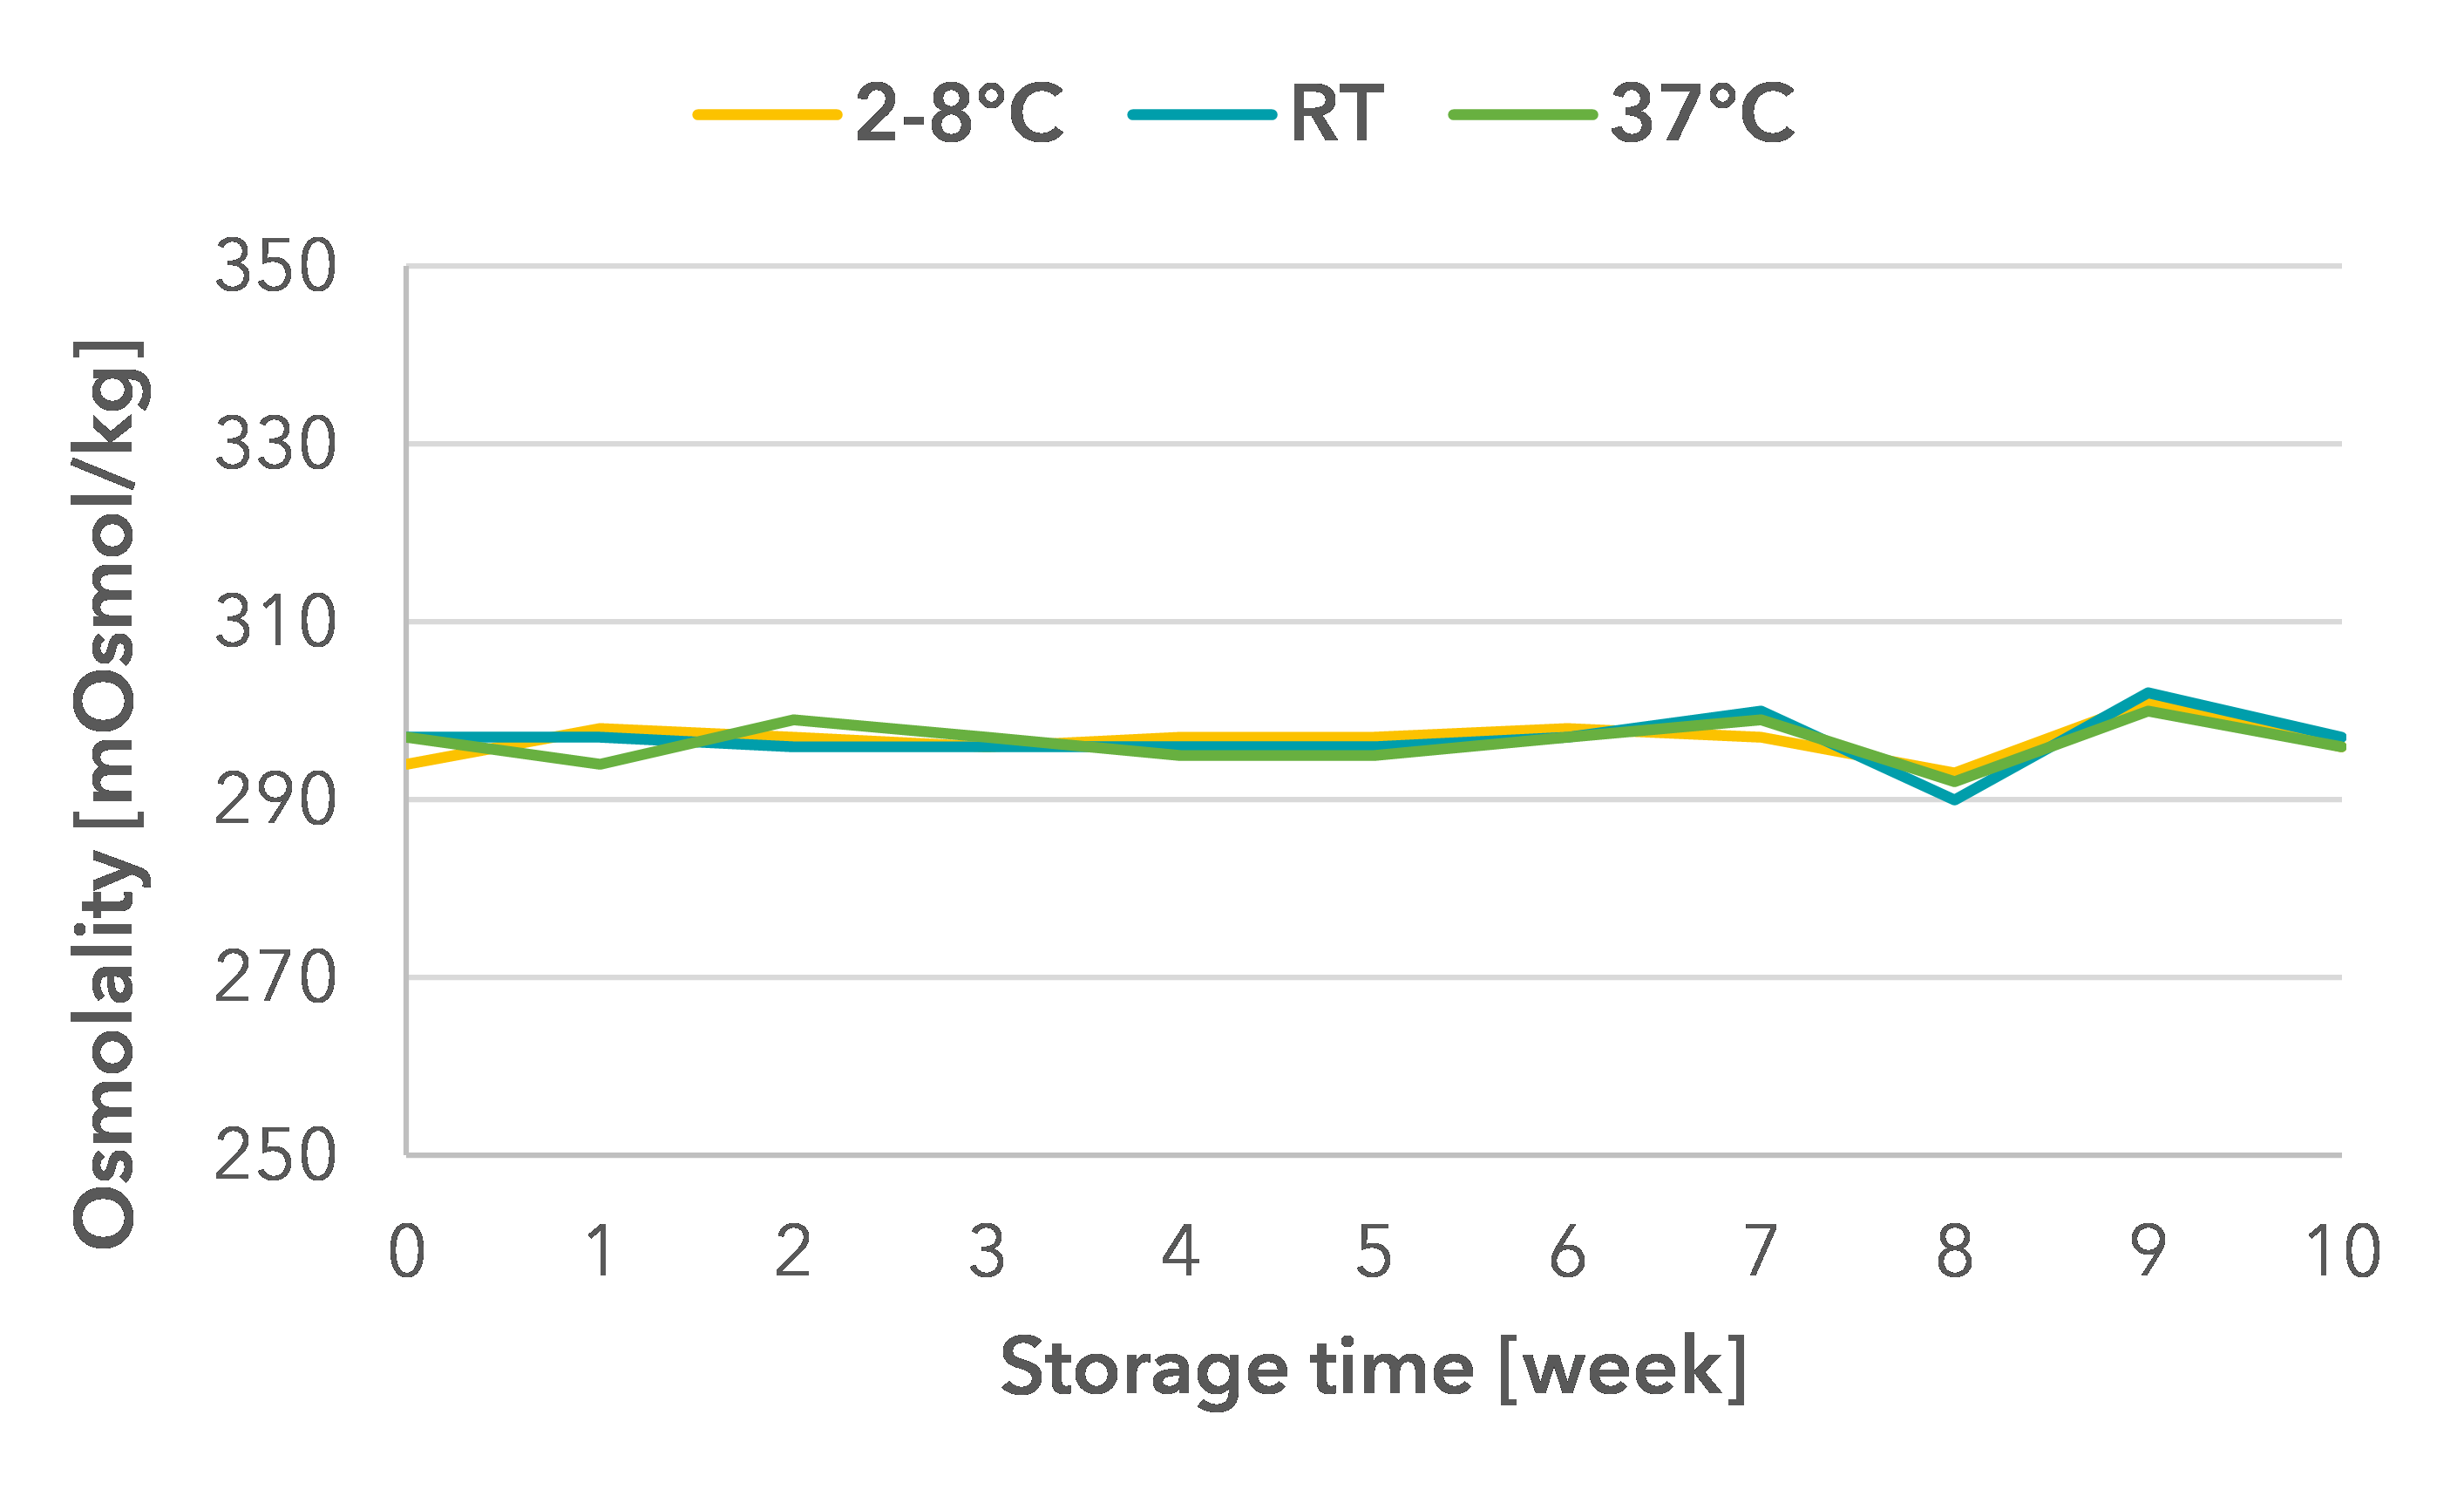 Osmolality over 10 weeks at temporarily deviating storage conditions (RT = room temperature or 37°C) compared to the recommended storage at 2-8°C, as an indicator for precipitation and raw material degradation.